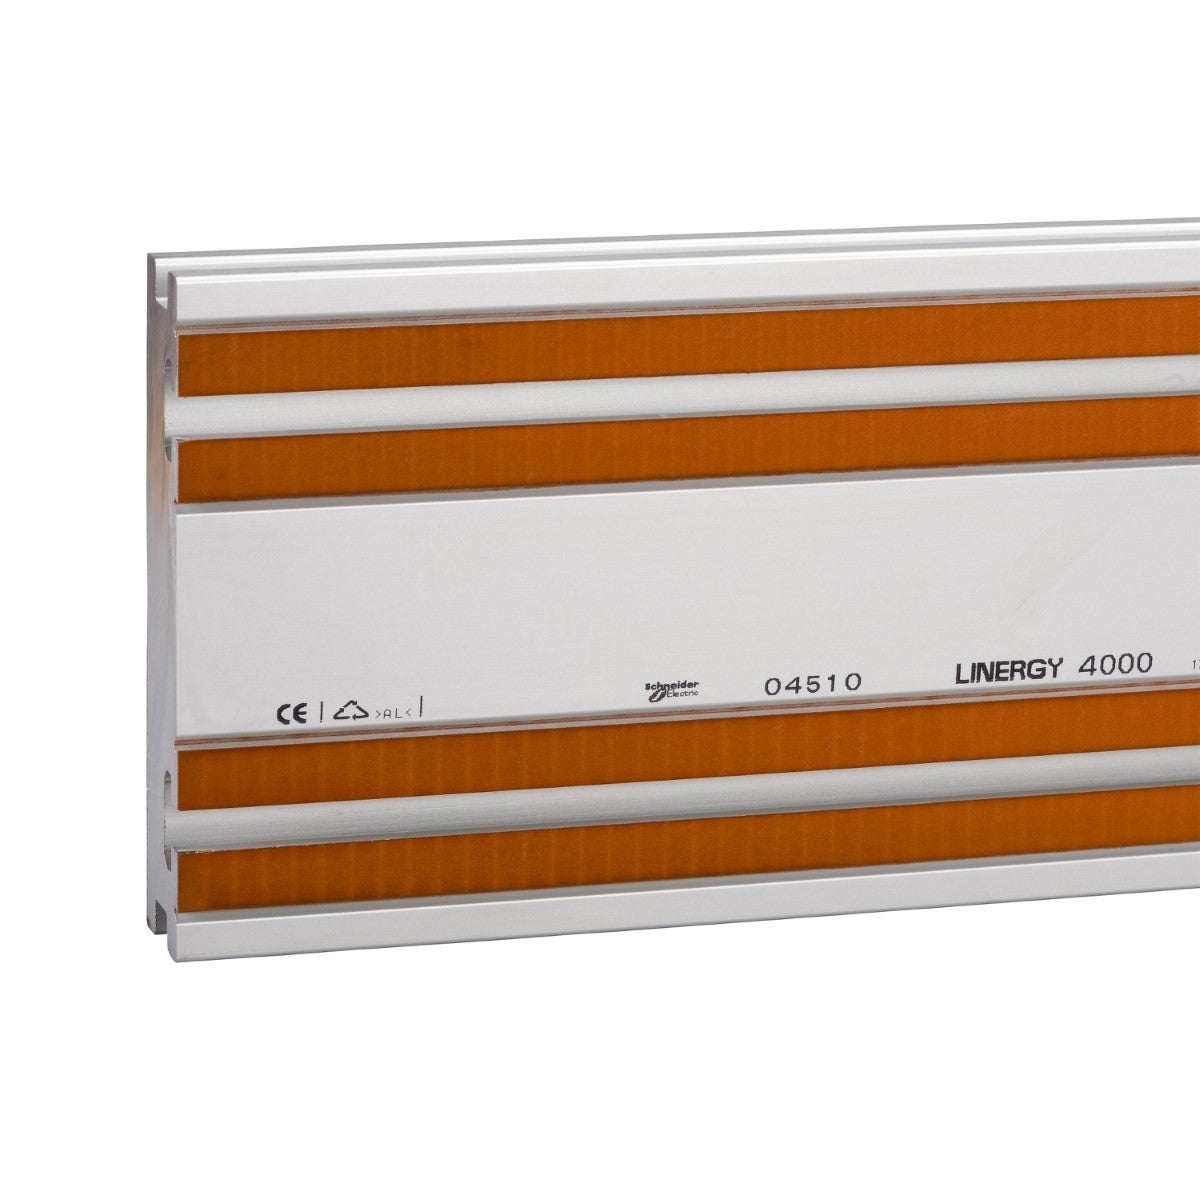 Profile busbar, Linergy LGYE, 4000A, for a horizontal installation, L2000mm